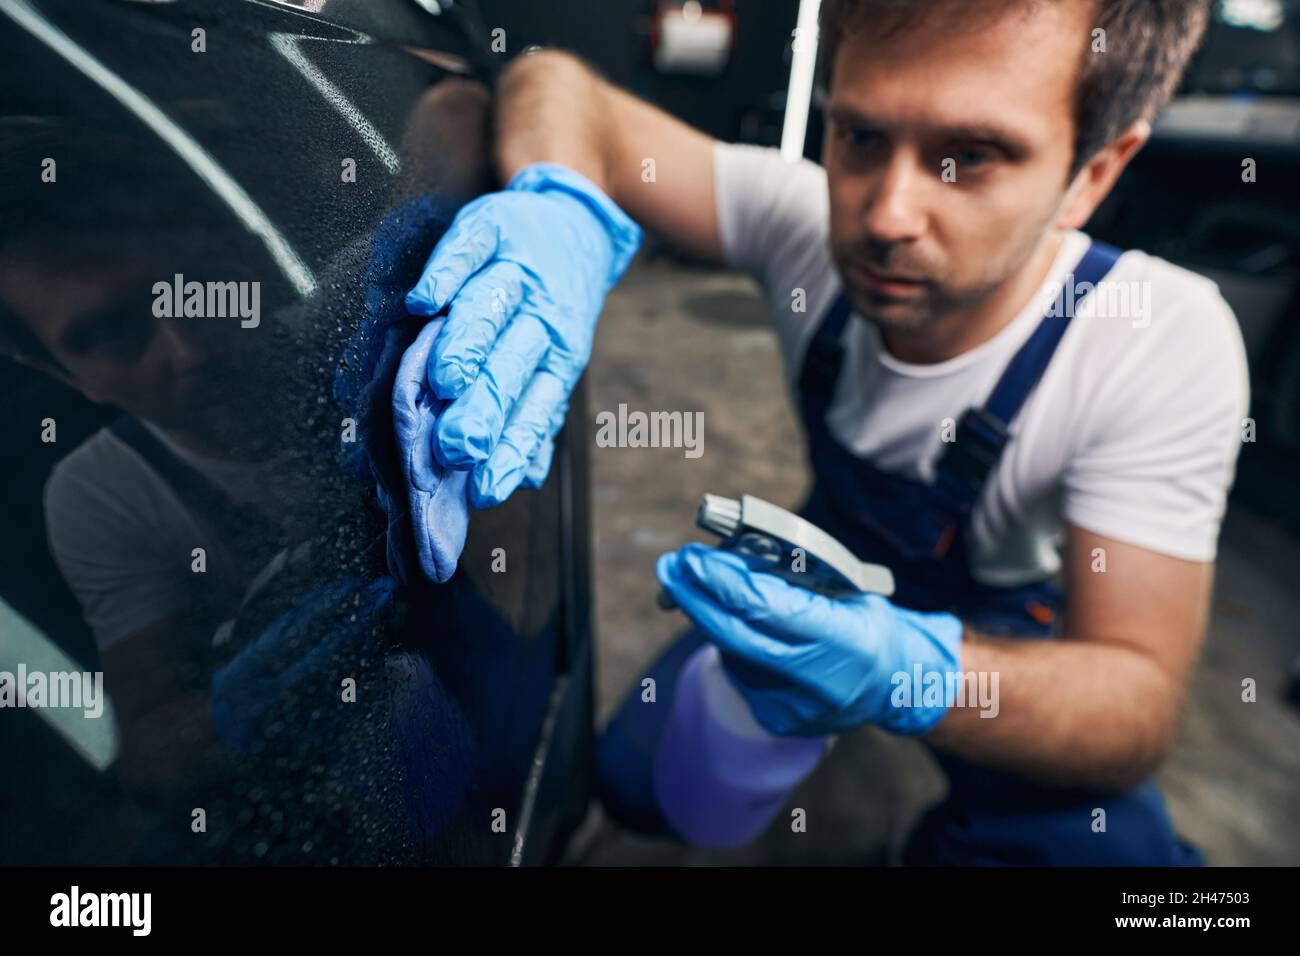 Worker of repair shop cleaning car with dustcloth Stock Photo